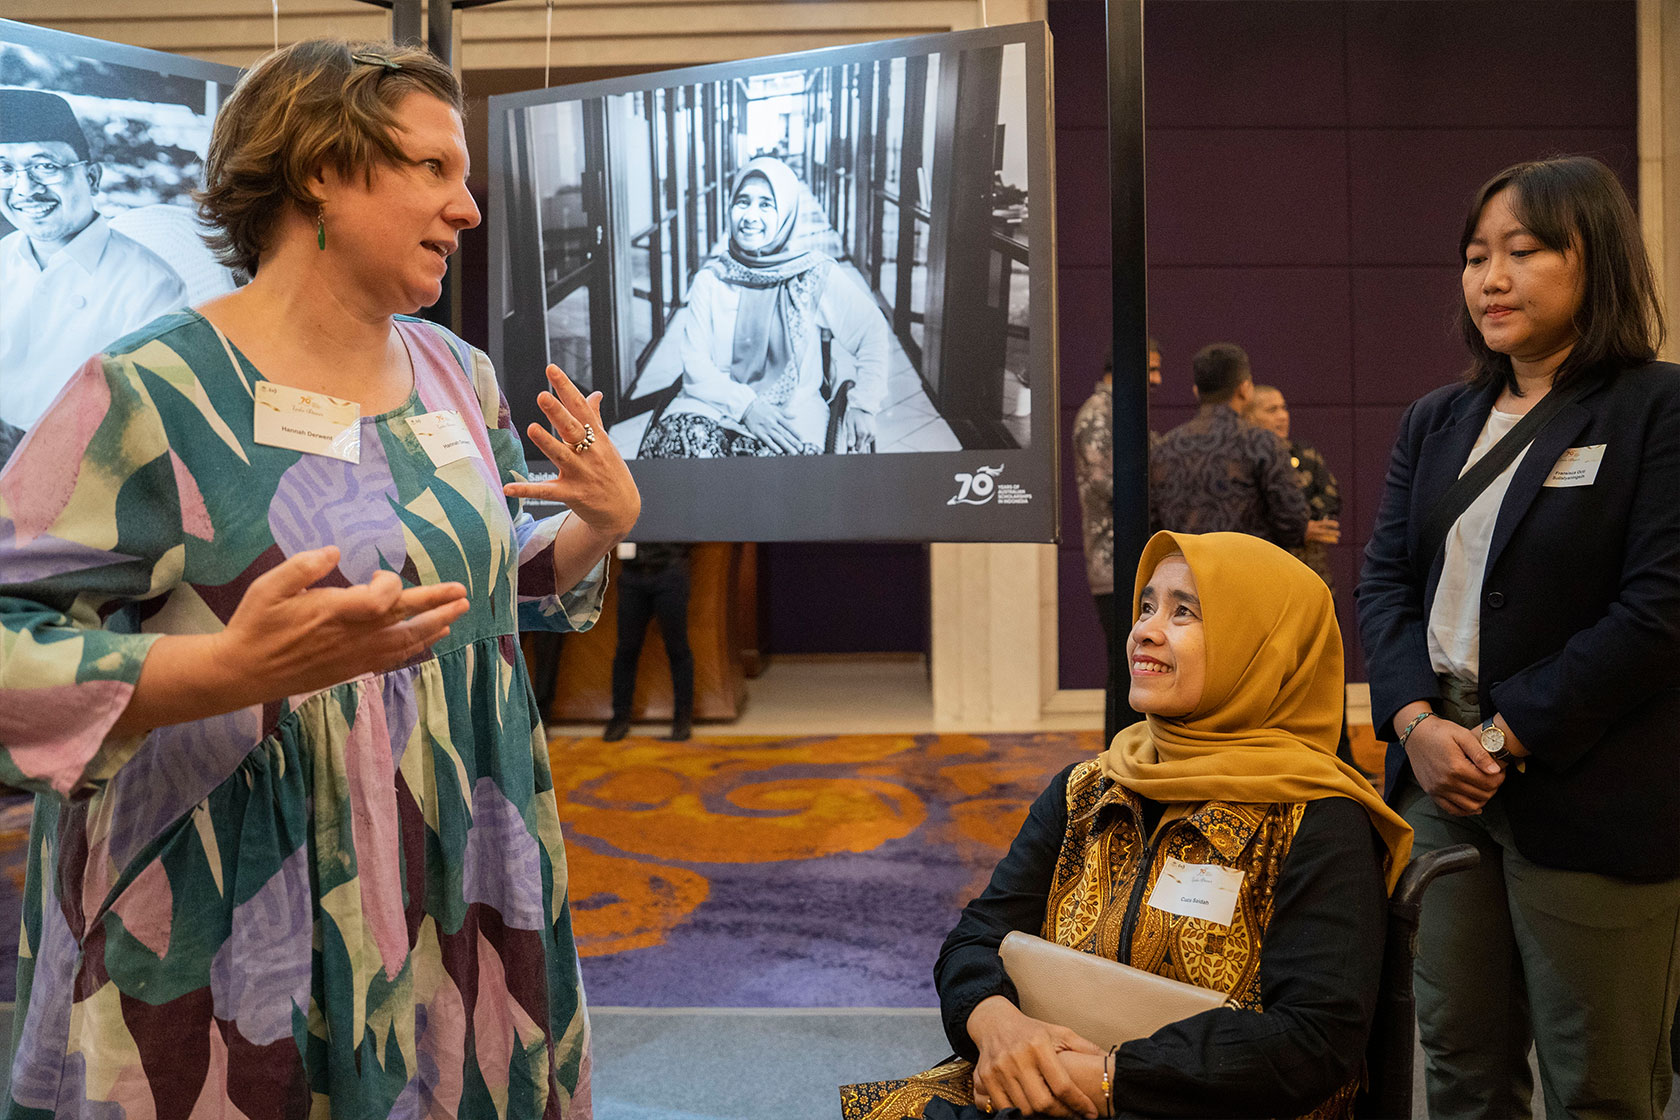 A representative of the Australian Embassy Jakarta engages in a friendly chat with alumna Cucu Saidah, with her photo gracefully displayed in the background.